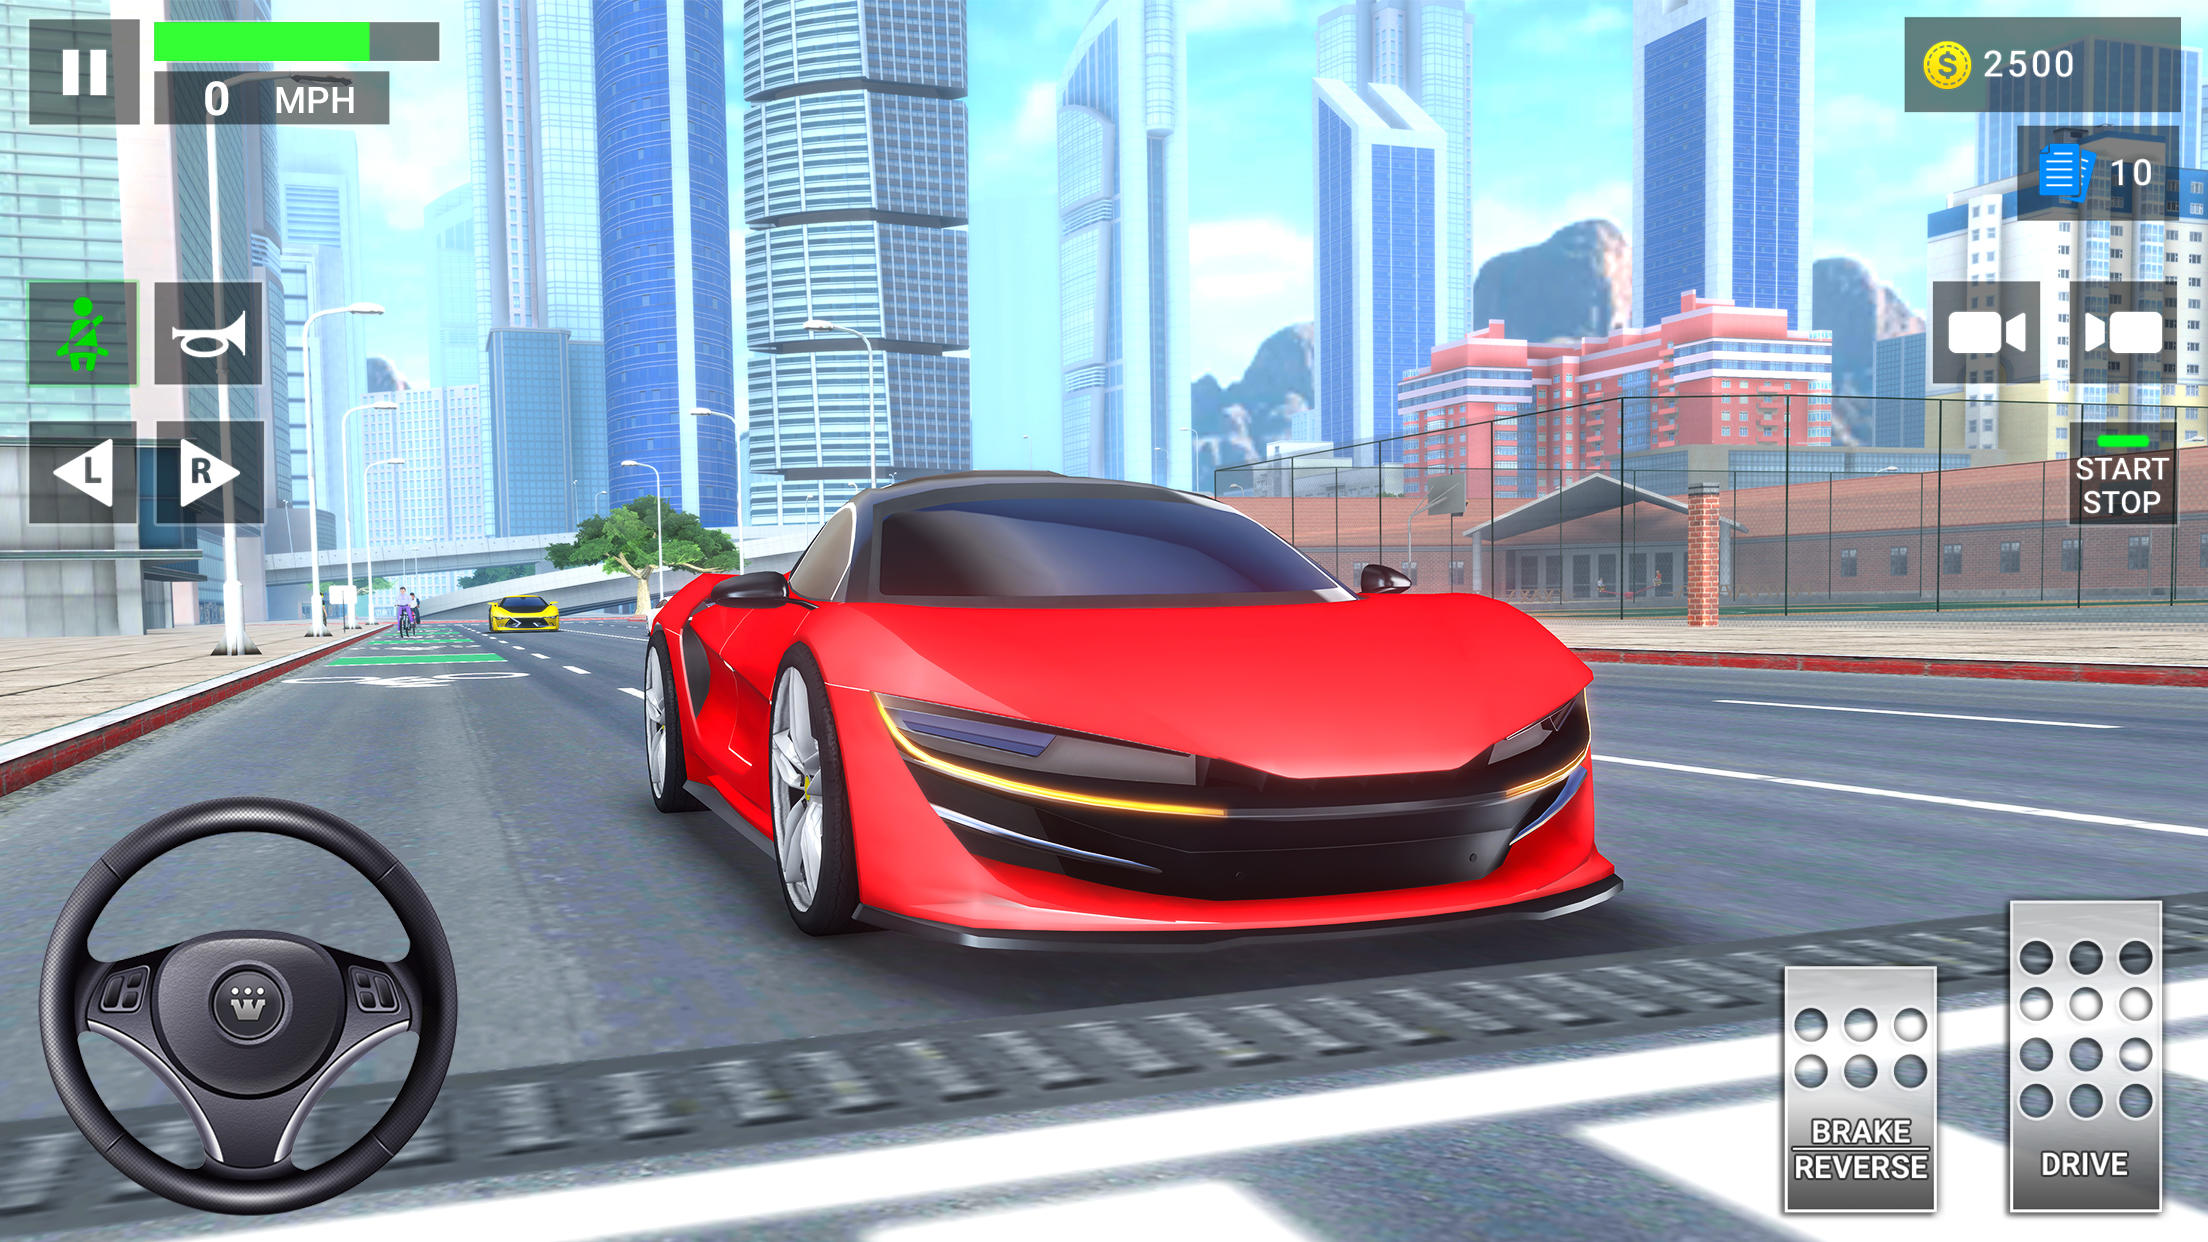 Screenshot 1 of Driving Academy 2 Game Mobil 3.8